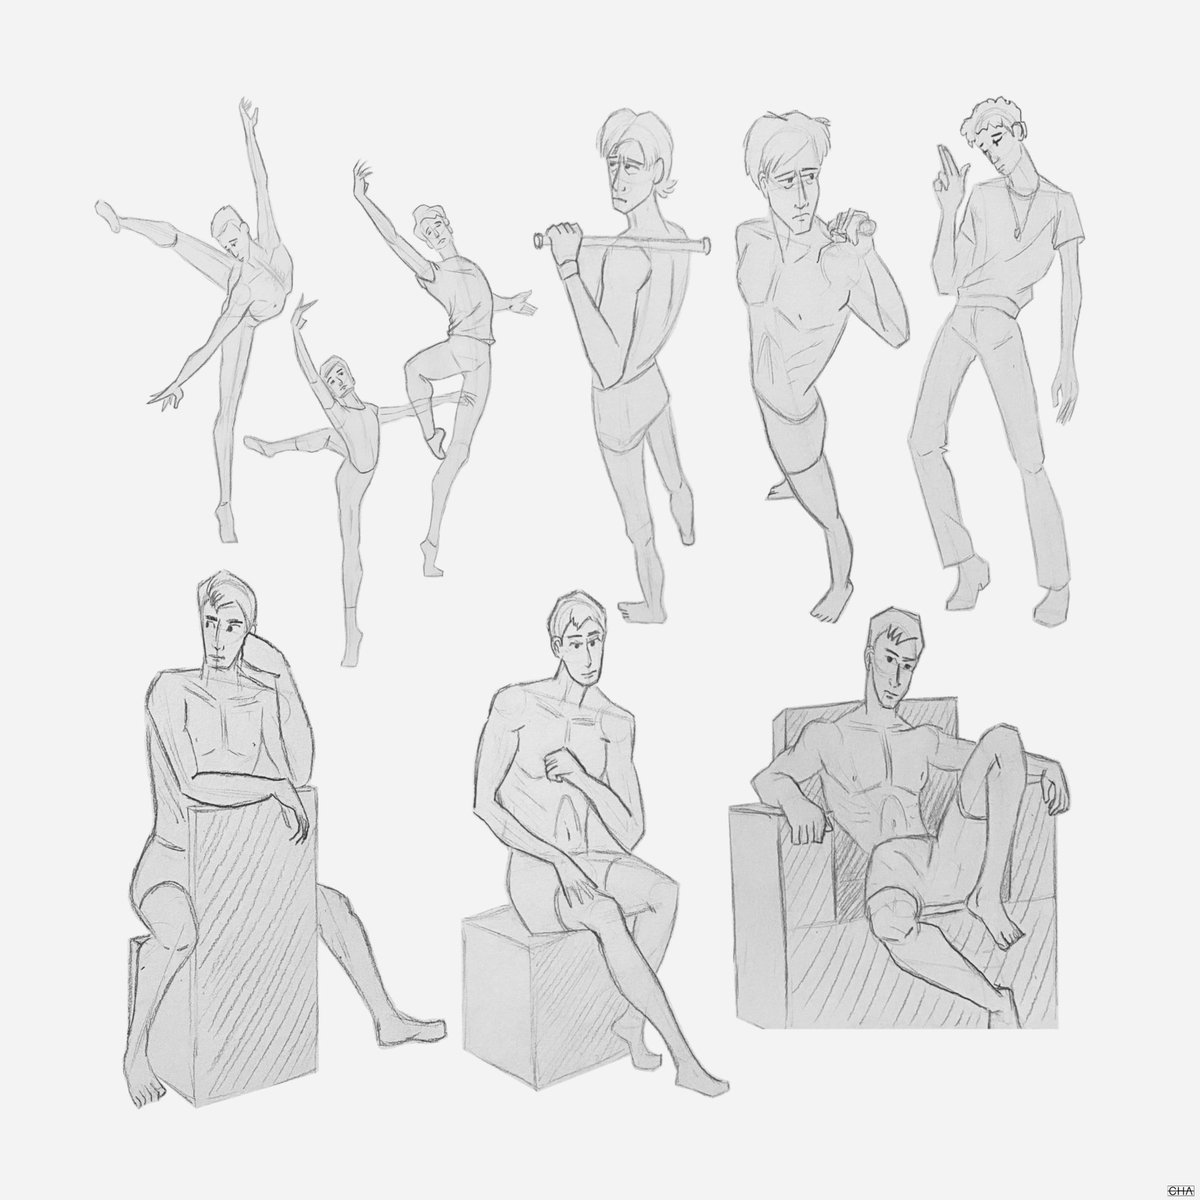 Sitting Drawing References and Sketches for Artists